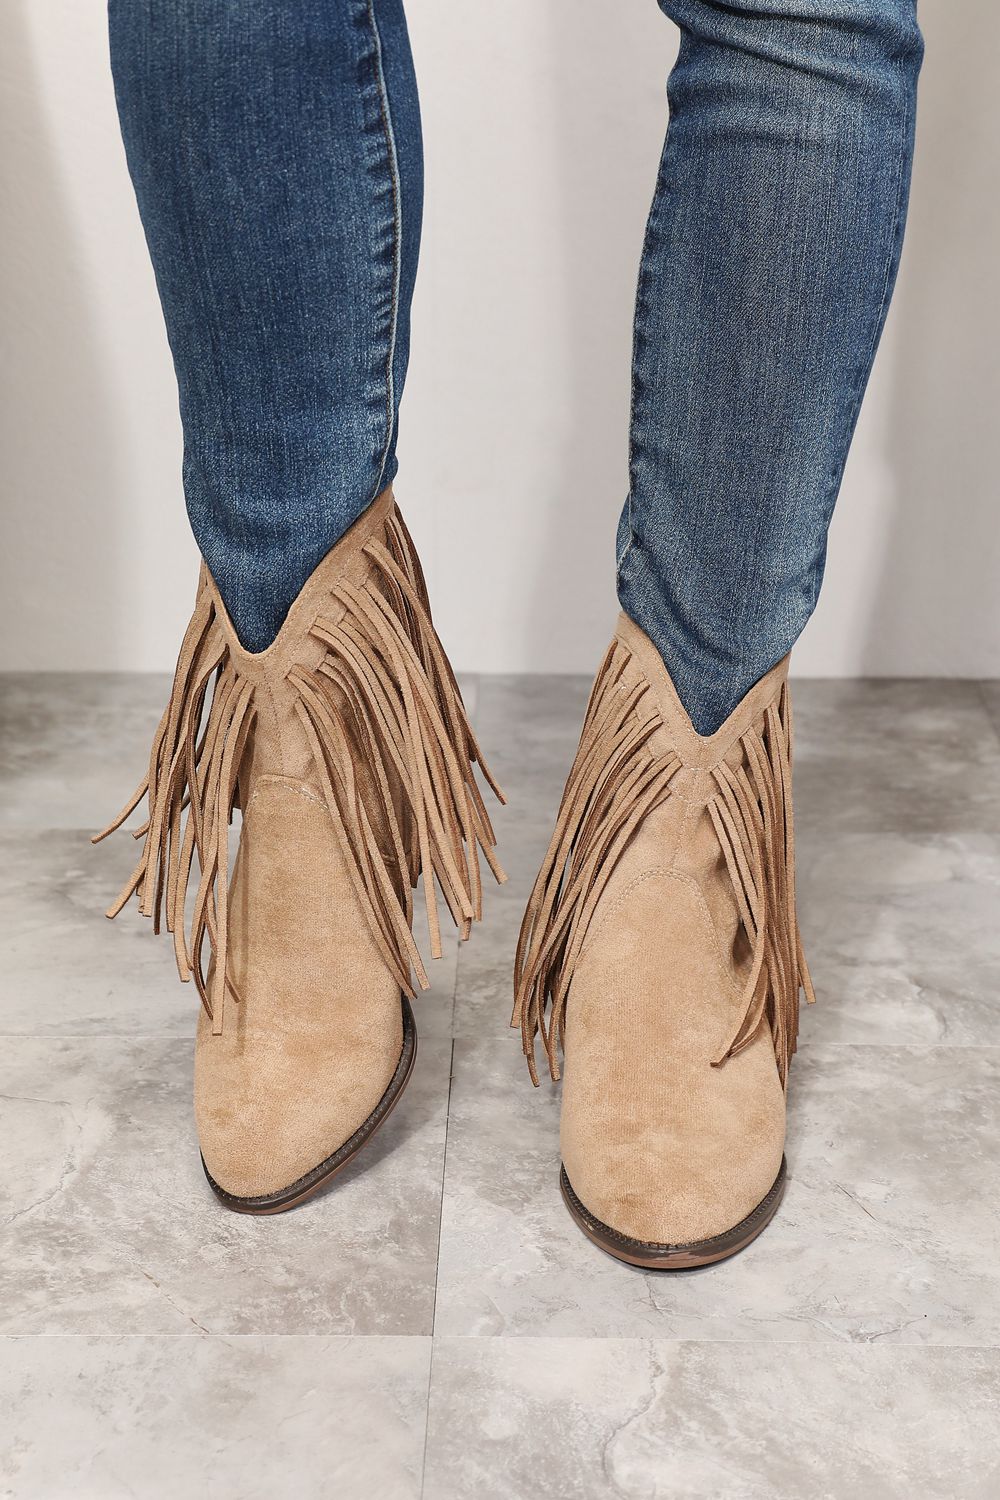 On The Fringe Cowboy Western Ankle Boots in Tan